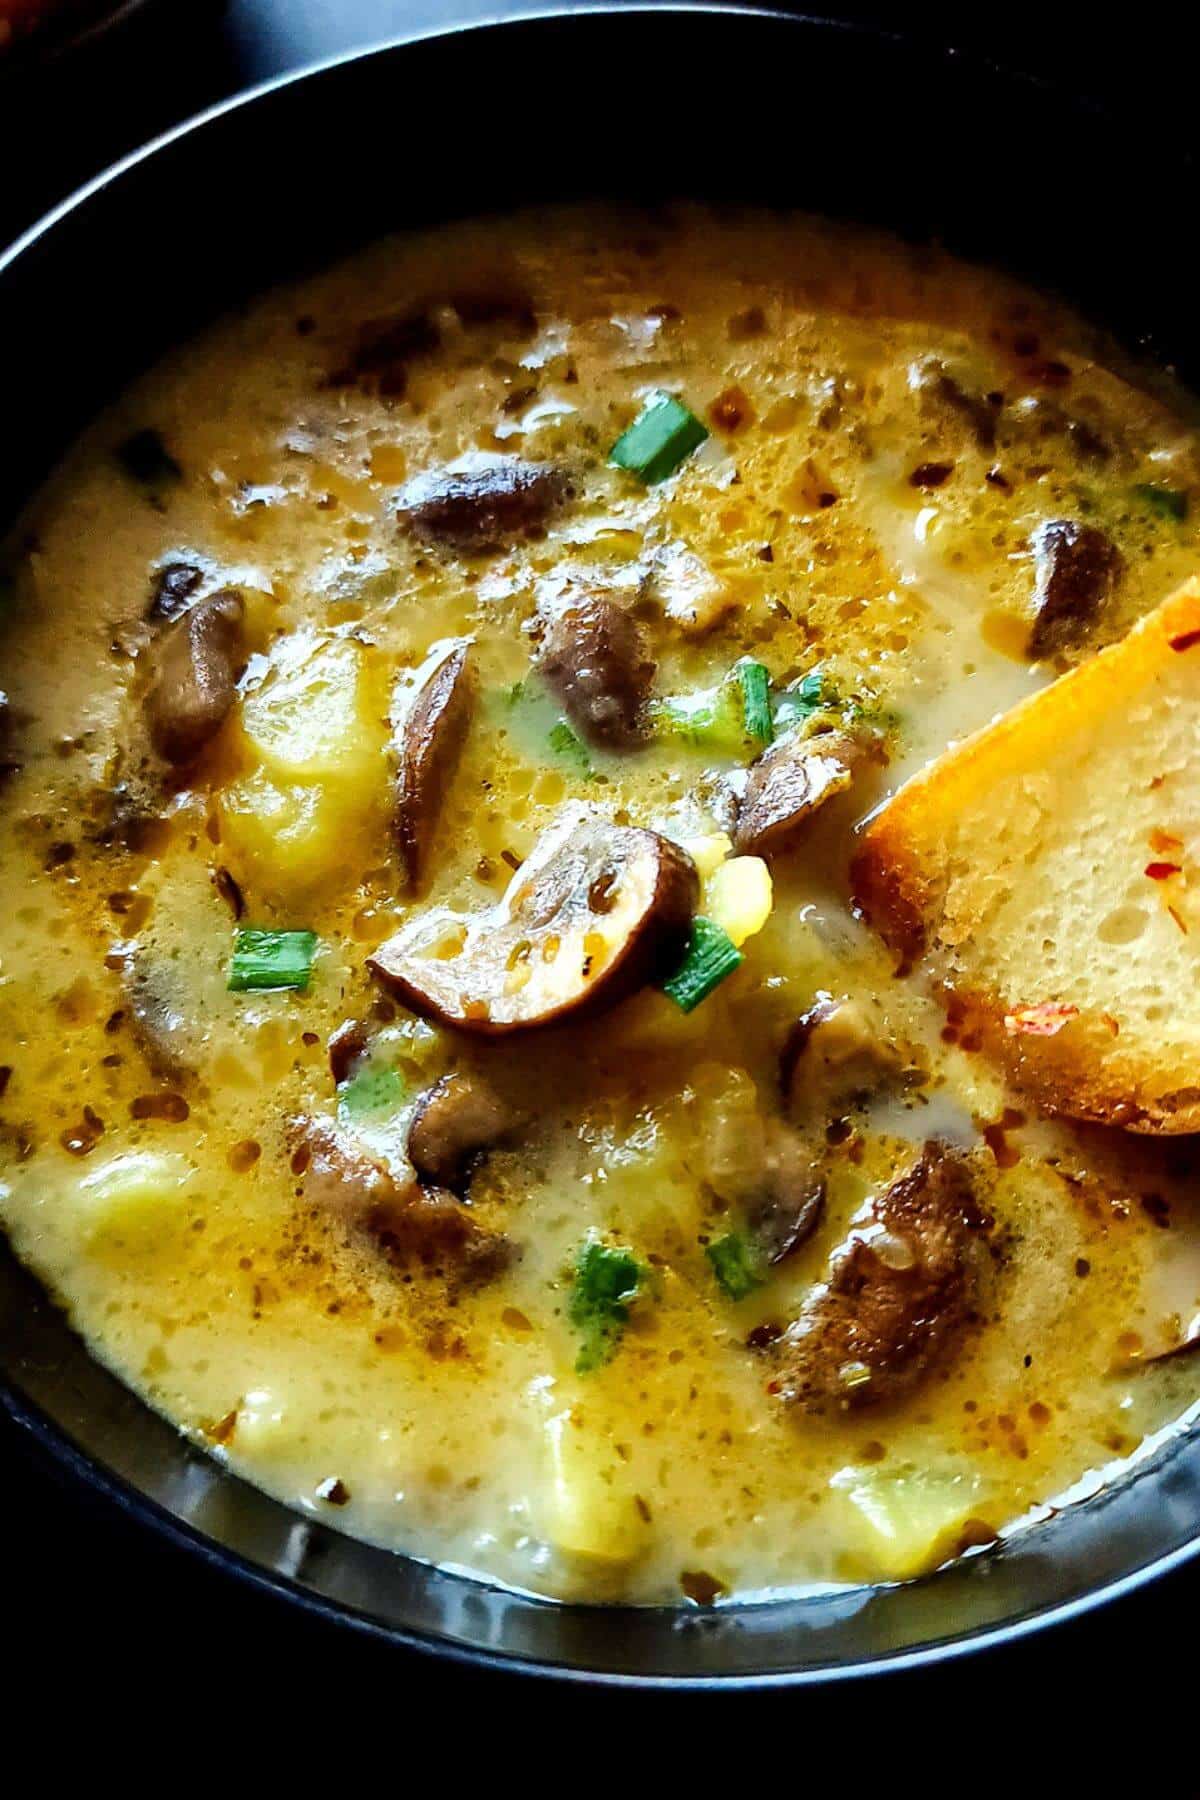 Toasted bread dipped in a bowl of mushroom potato soup.